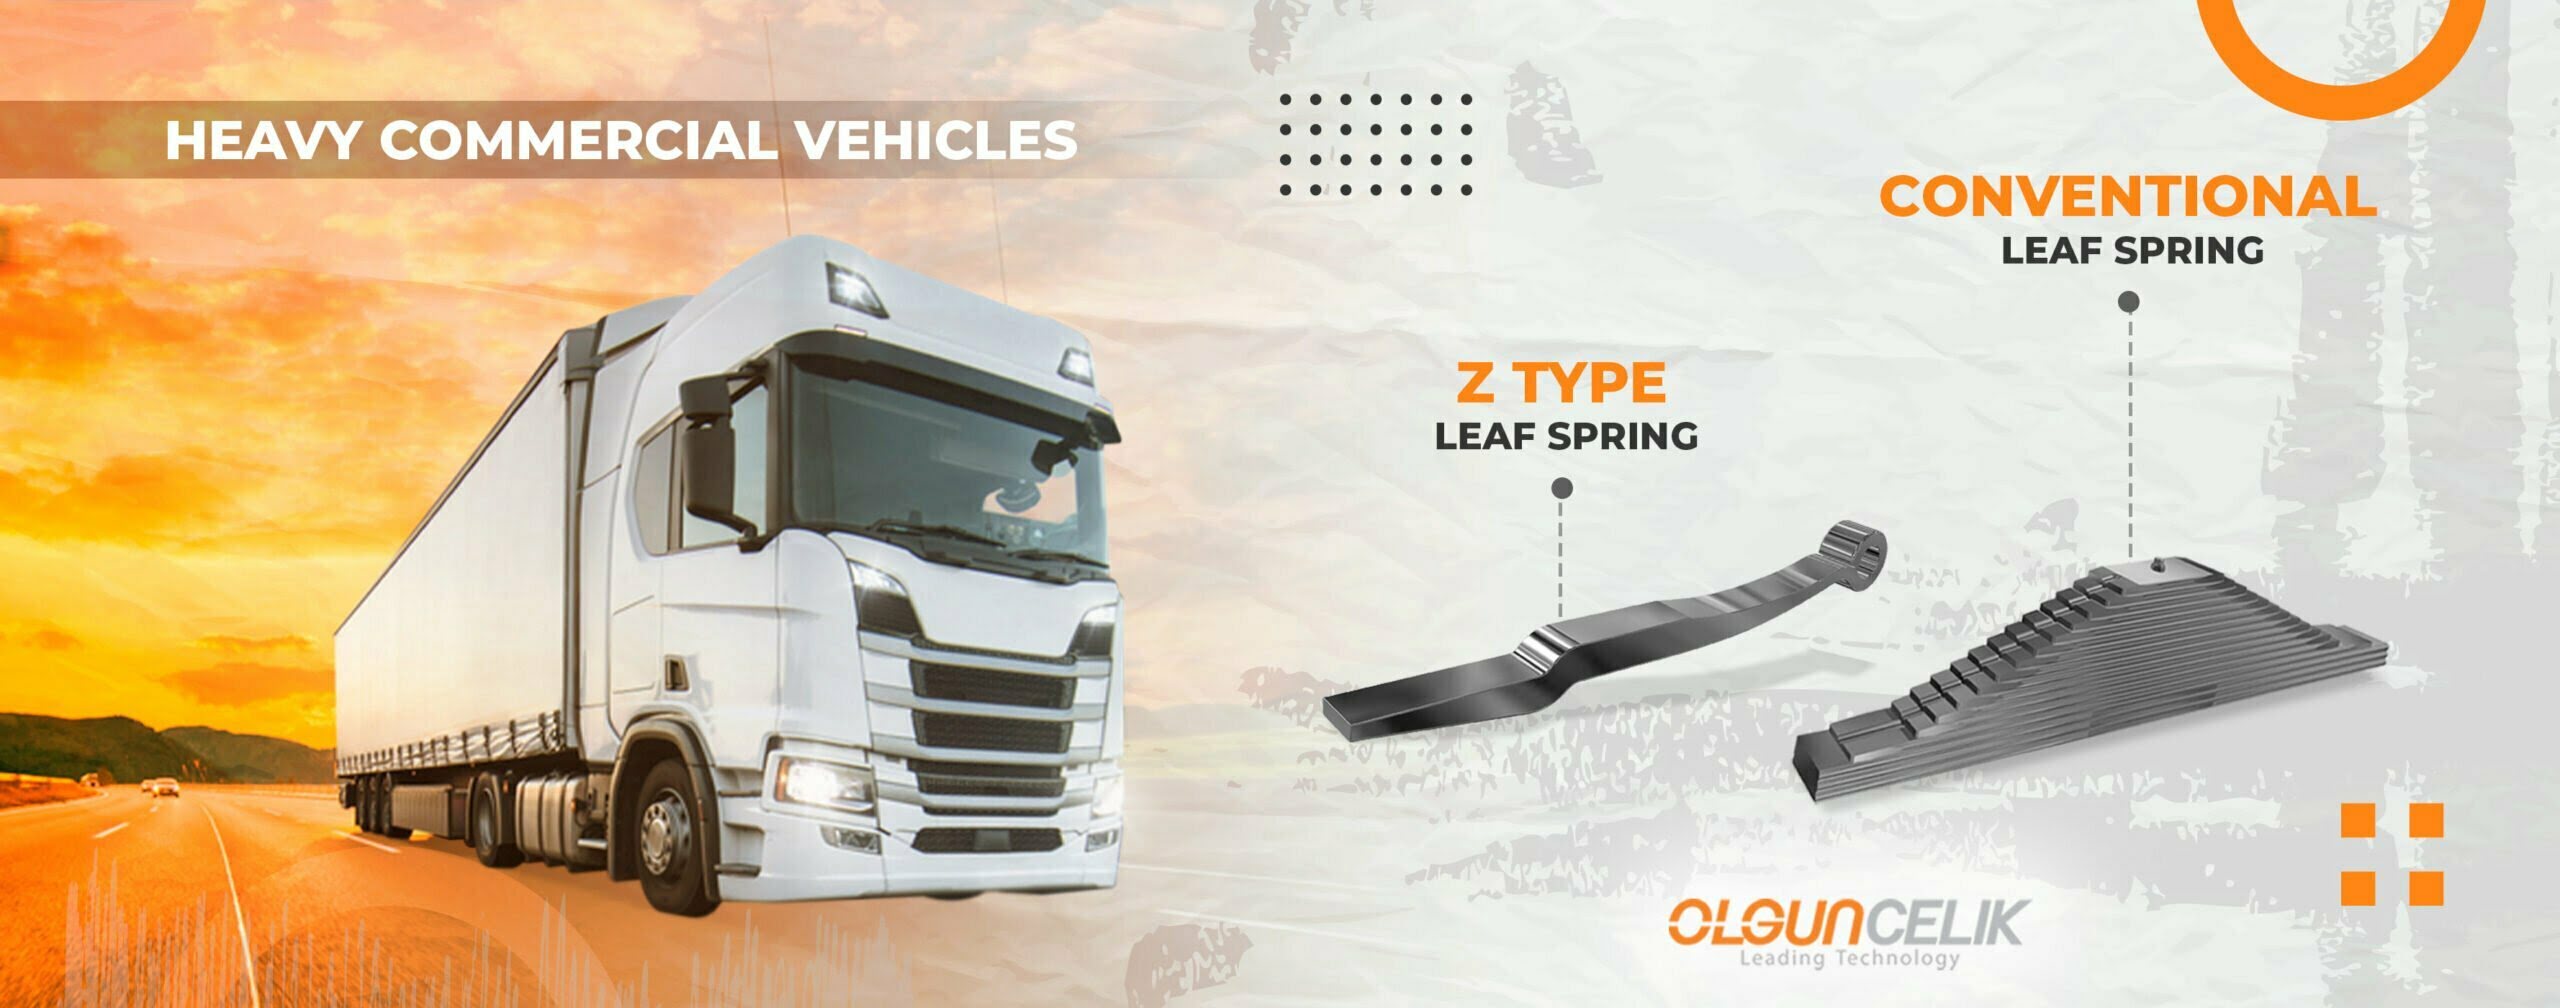 Heavy Commercial Vehicles